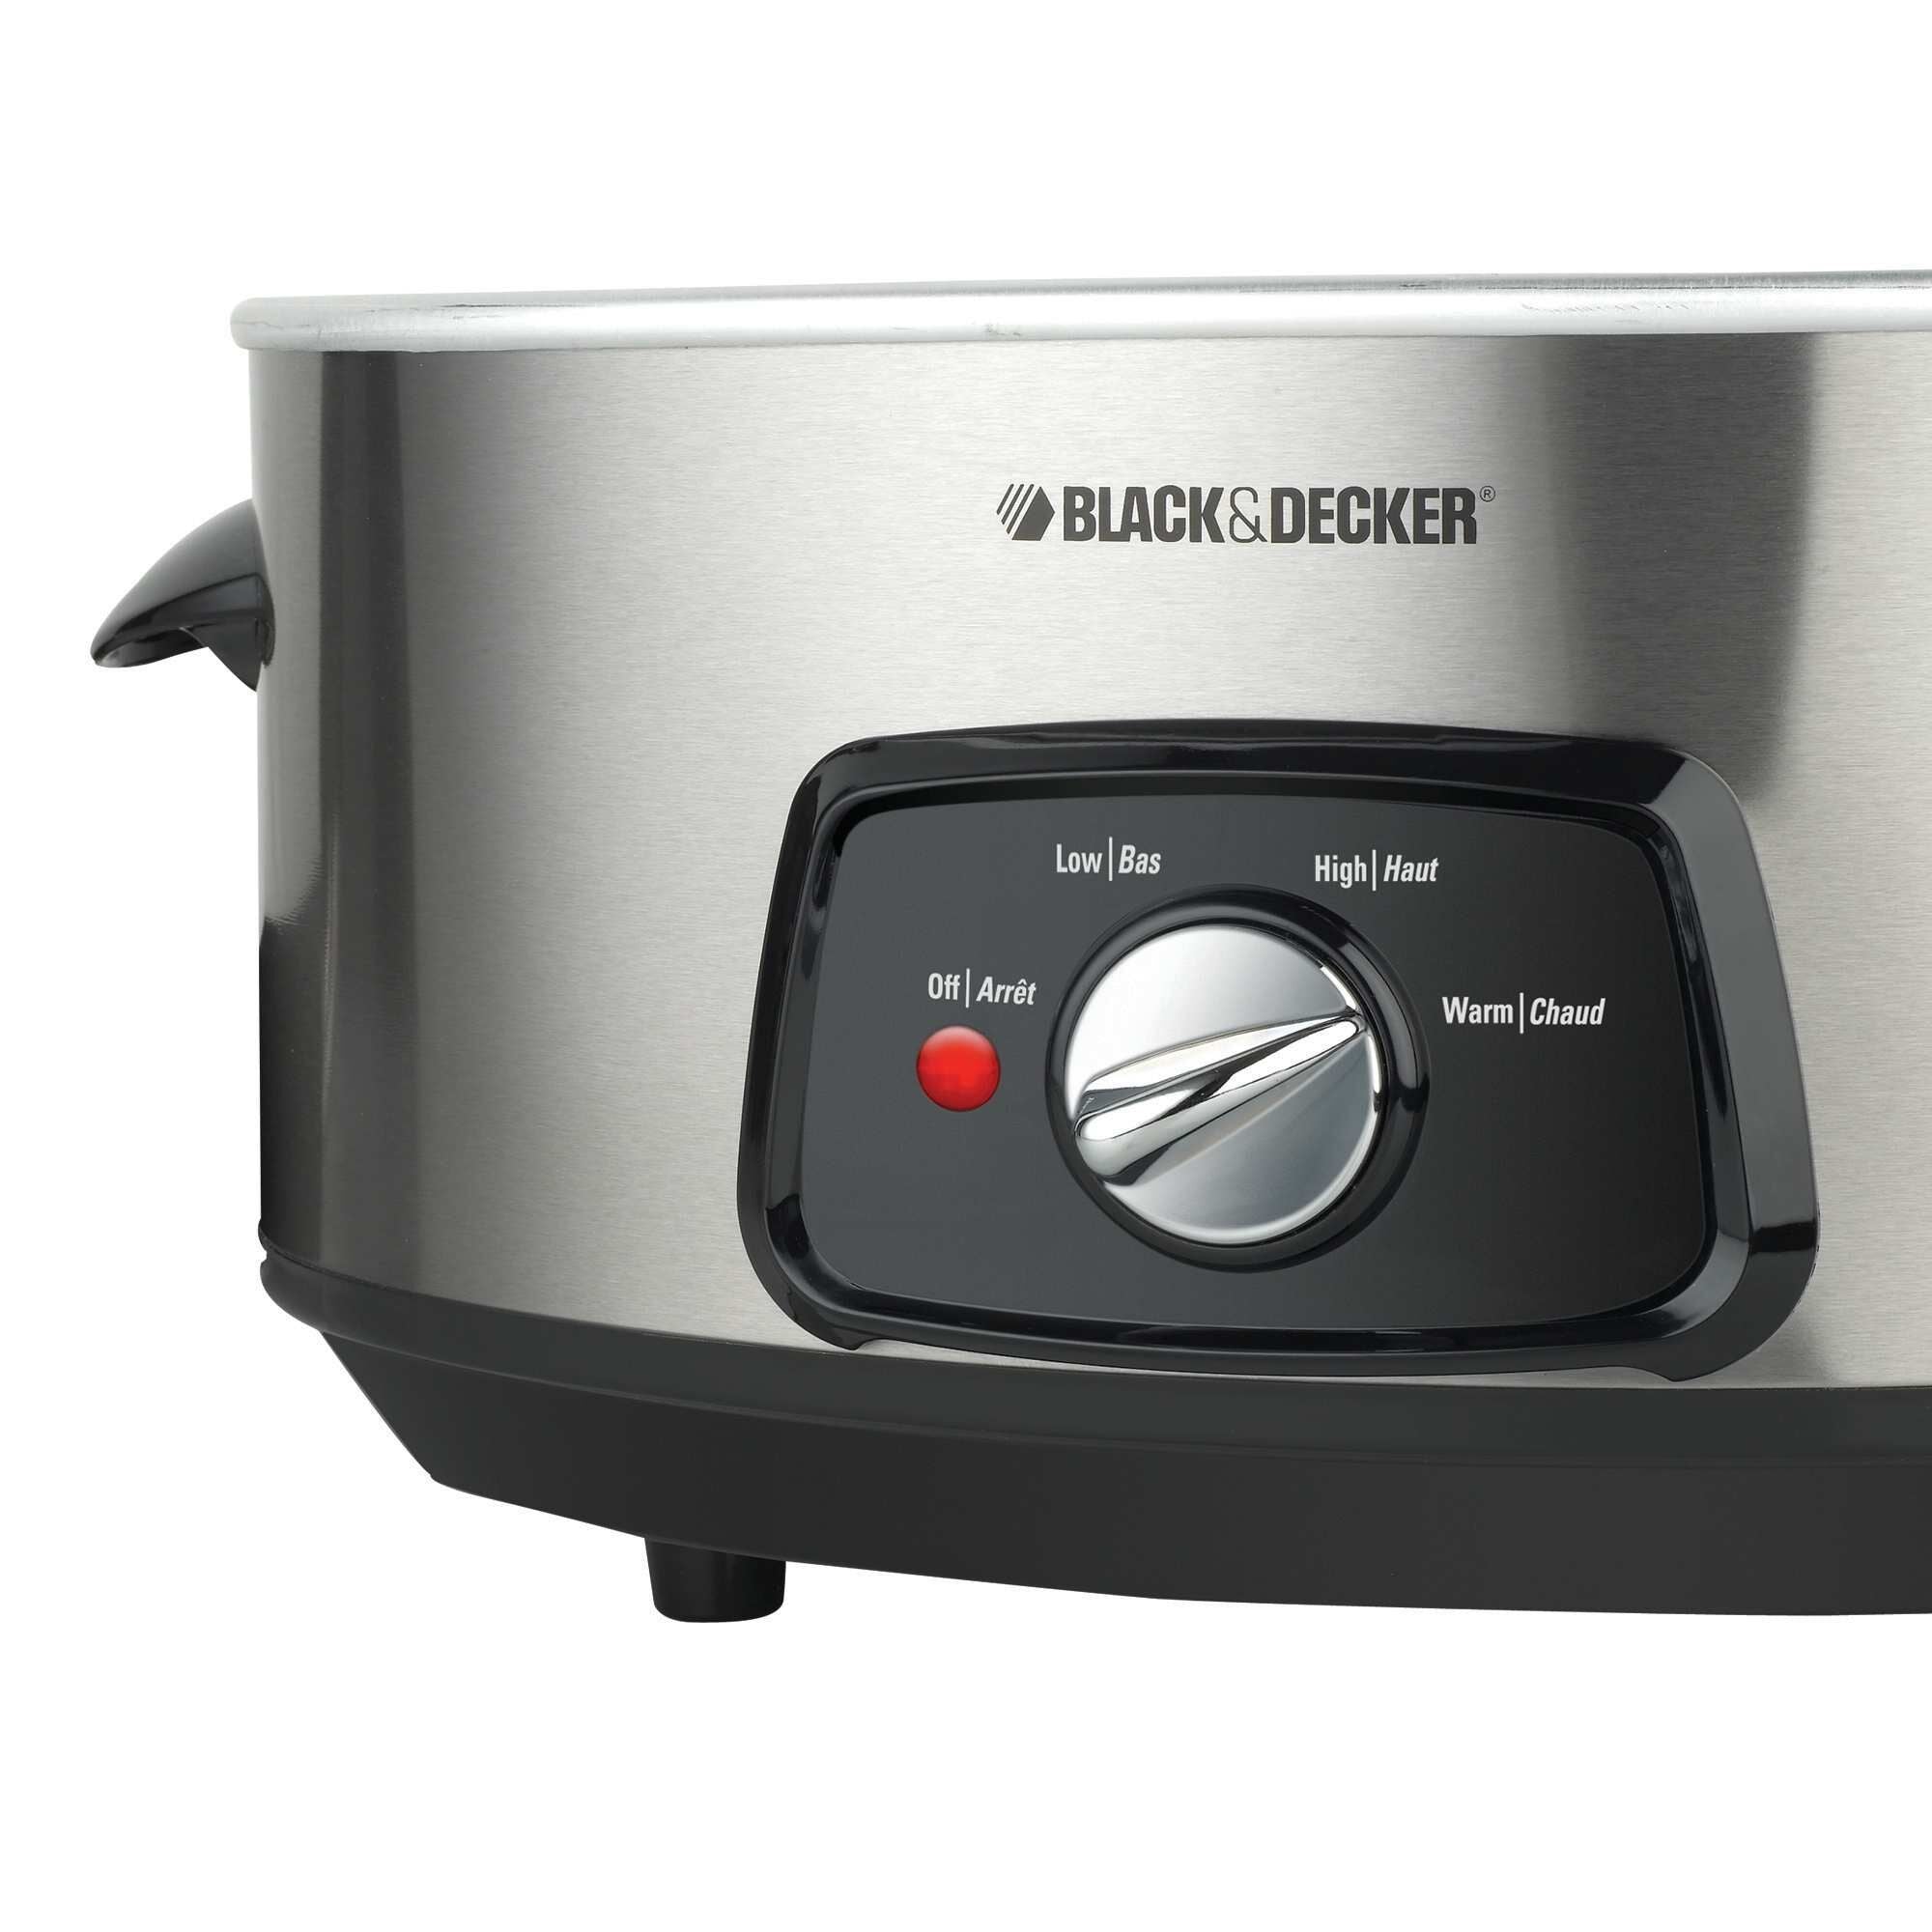  BLACK+DECKER 7 Quart Dial Control Slow Cooker with